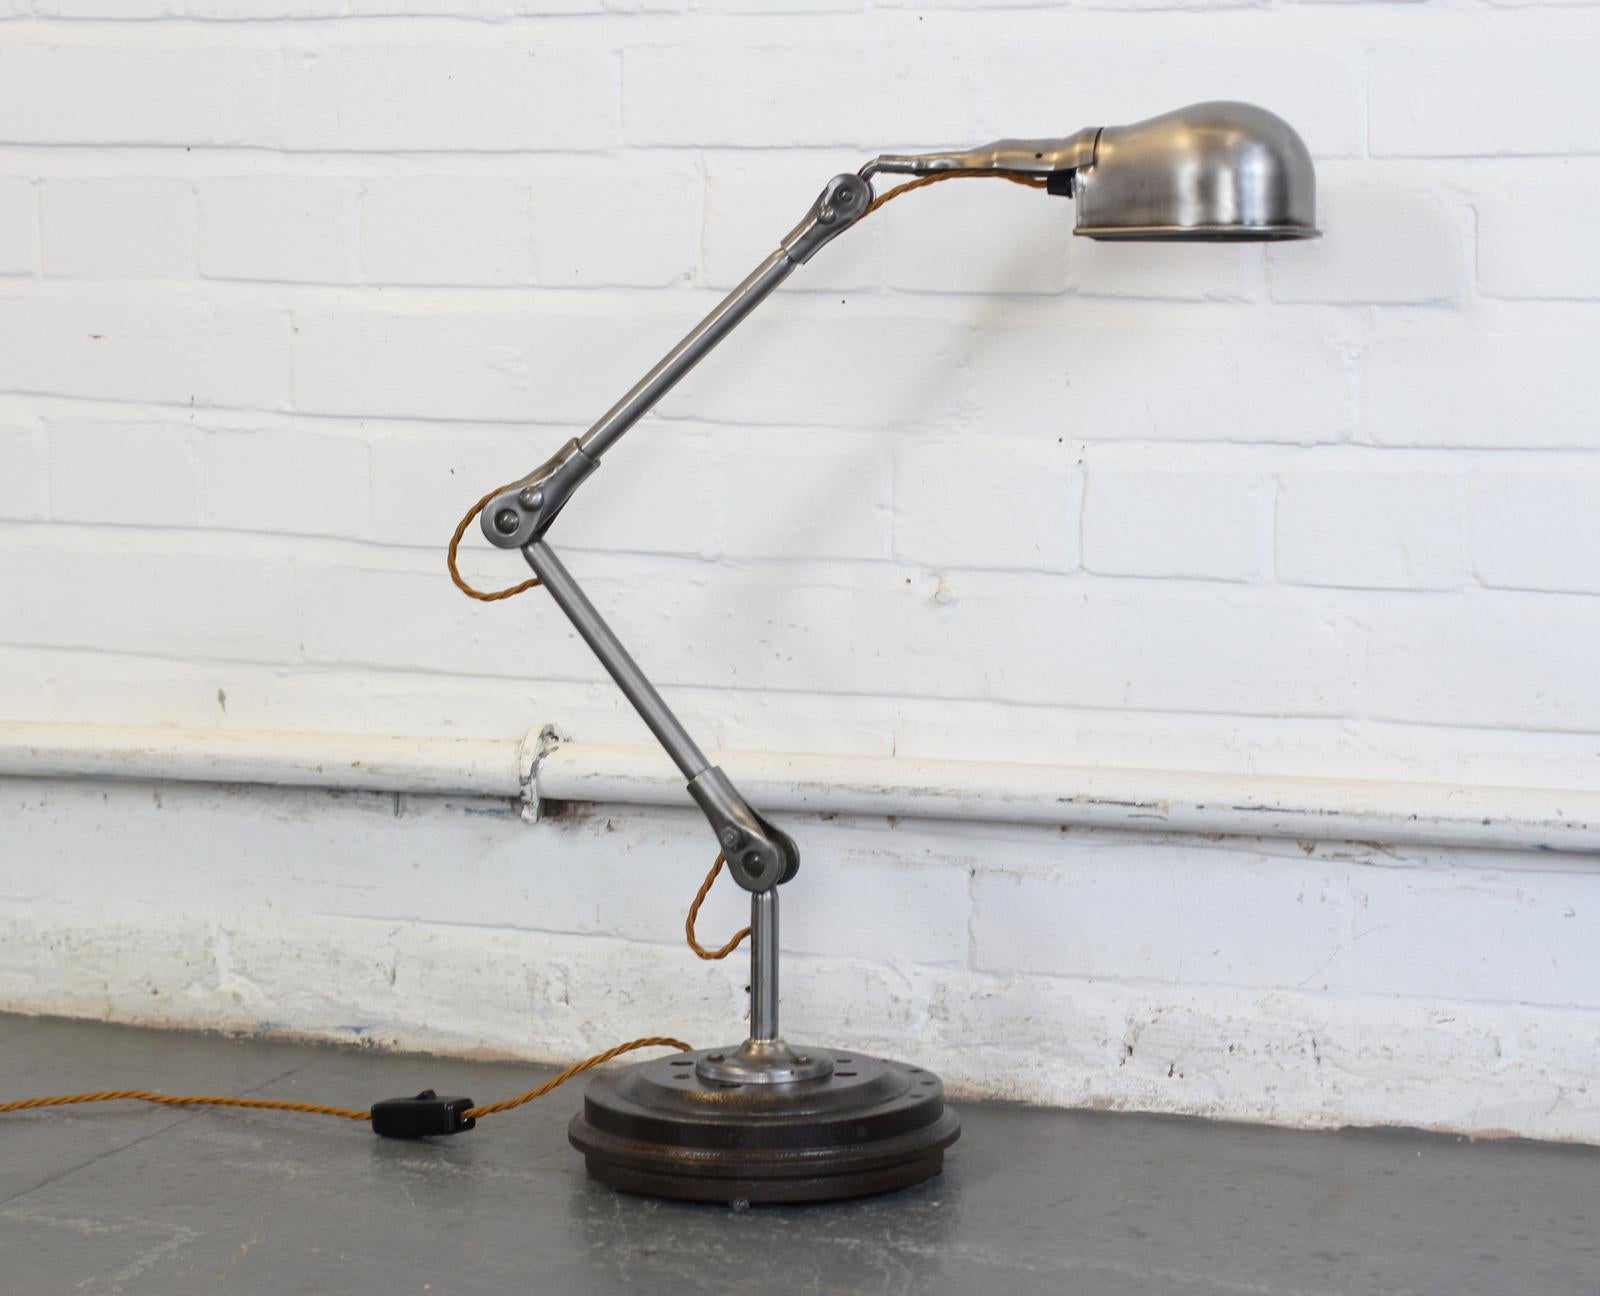 Industrial task lamp by Fostoria USA, circa 1940s

- Fully articulated with ball and socket joints
- Tubular steel arms with aluminium shade
- Takes E27 fitting bulbs
- Re wired with old gold twist flex
- American, circa 1940s
- 21 cm x 21cm